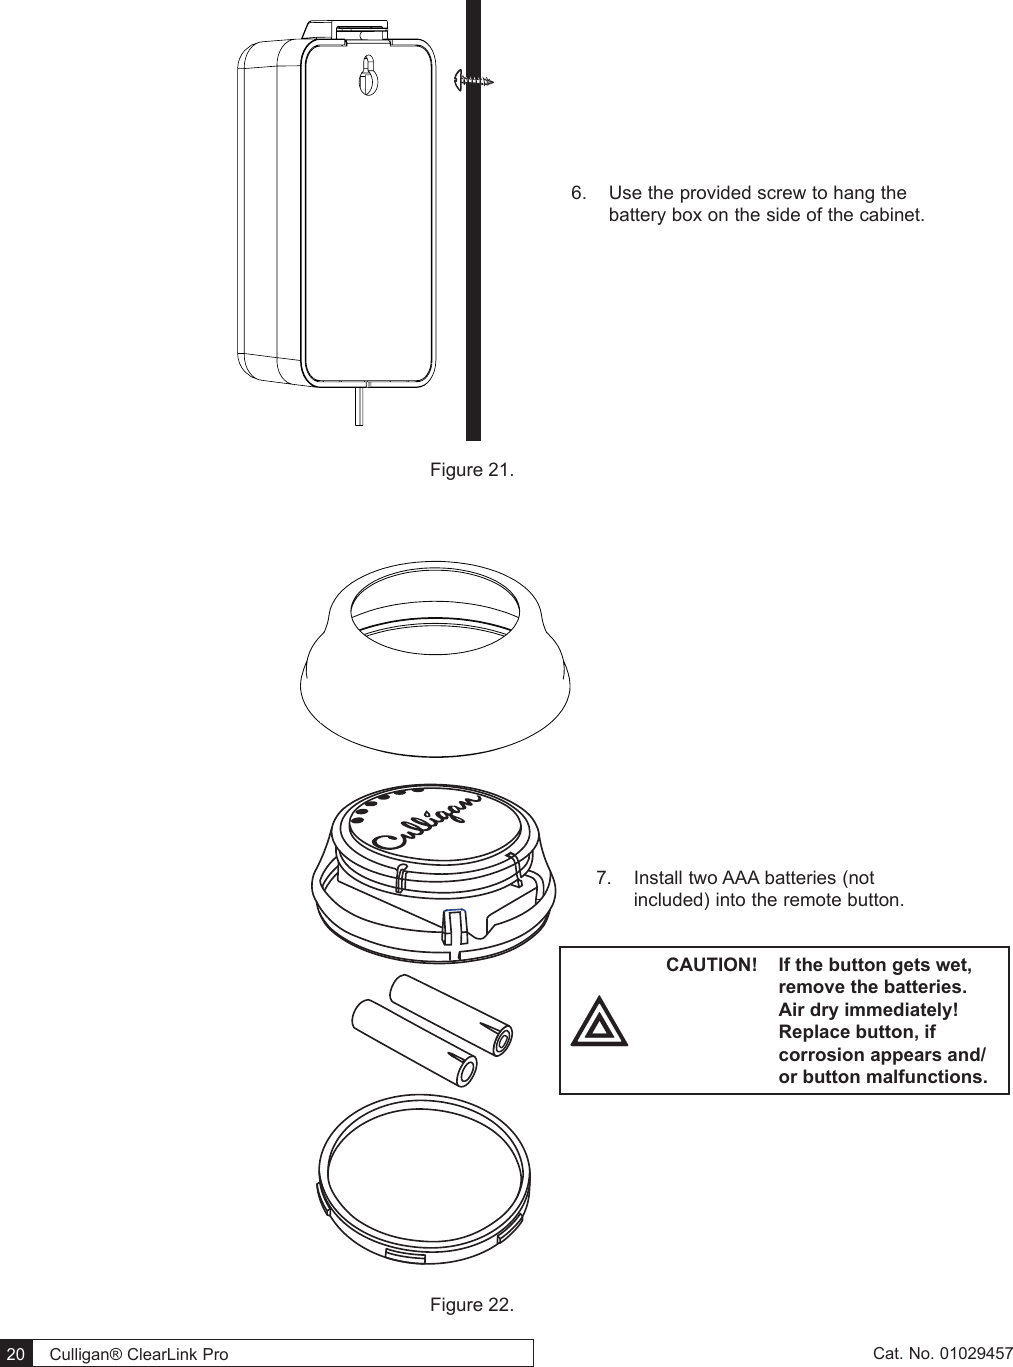  20   Culligan® ClearLink Pro  20  Cat. No. 01029457Figure 21.    Figure 22. 6.  Use the provided screw to hang the battery box on the side of the cabinet.7.  Install two AAA batteries (not included) into the remote button. CAUTION!  If the button gets wet, remove the batteries. Air dry immediately! Replace button, if corrosion appears and/or button malfunctions.